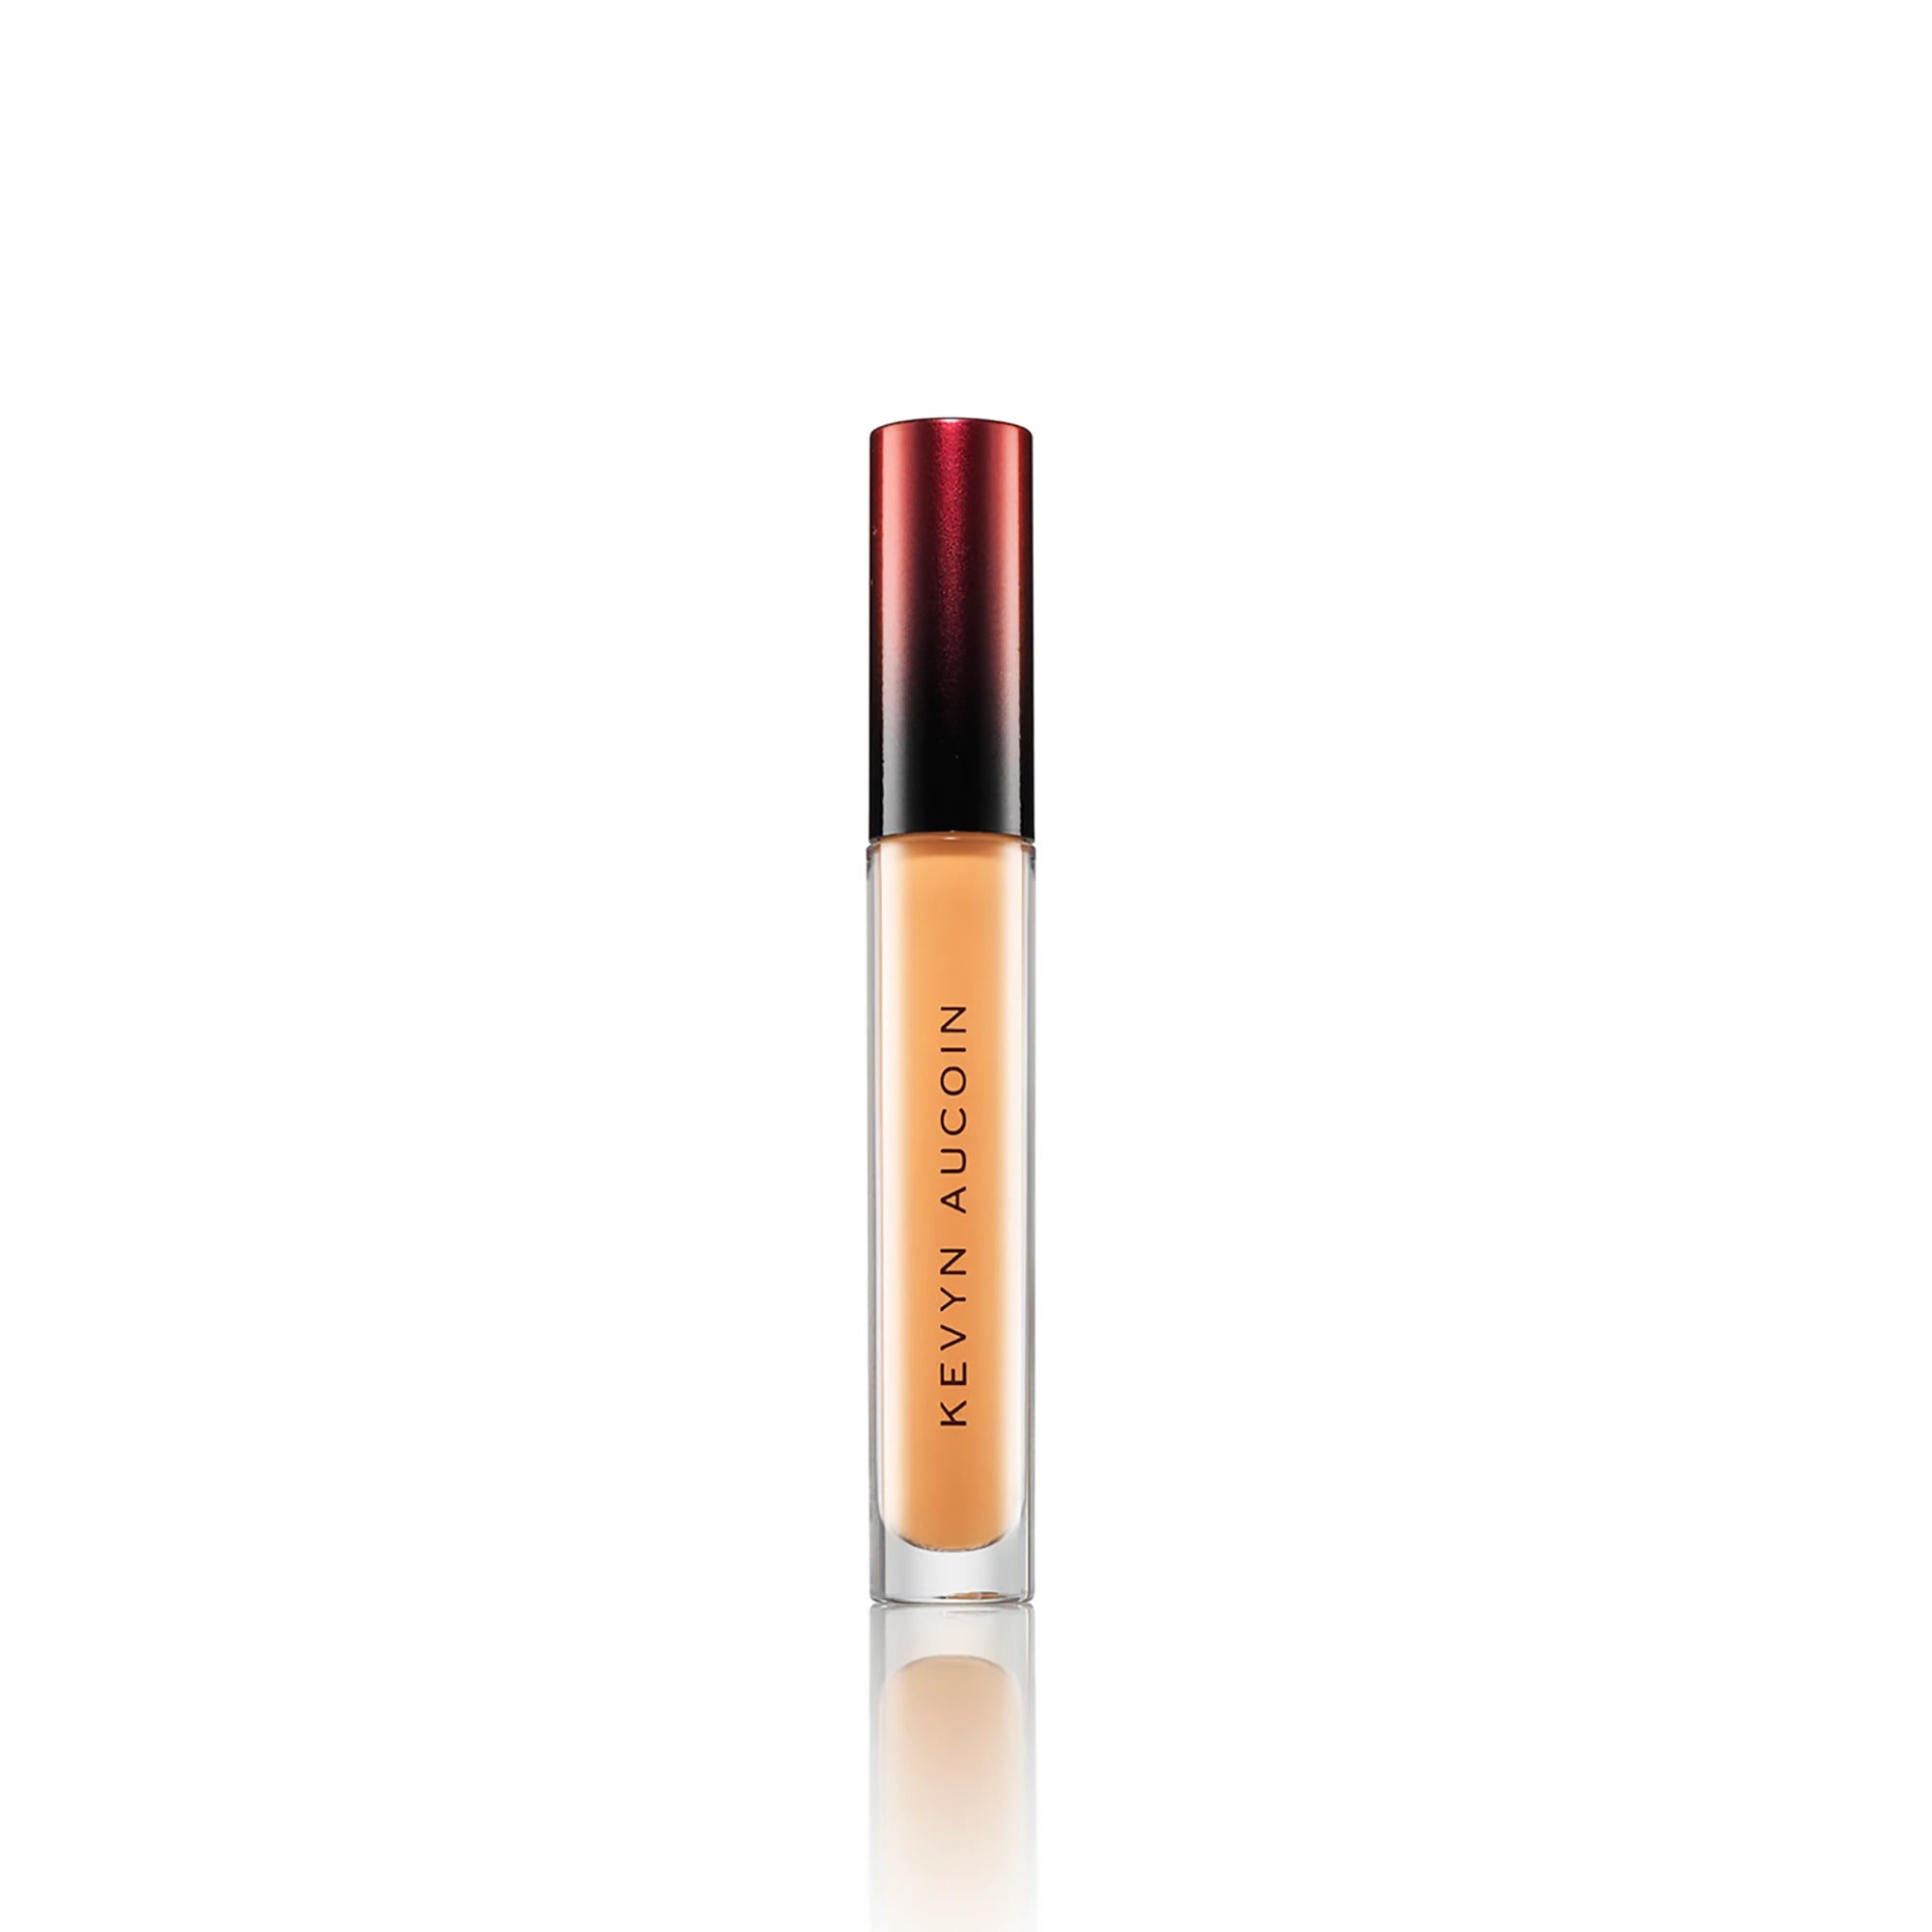 Kevyn Aucoin The Etherealist Super Natural Concealer / MEDIUM 6